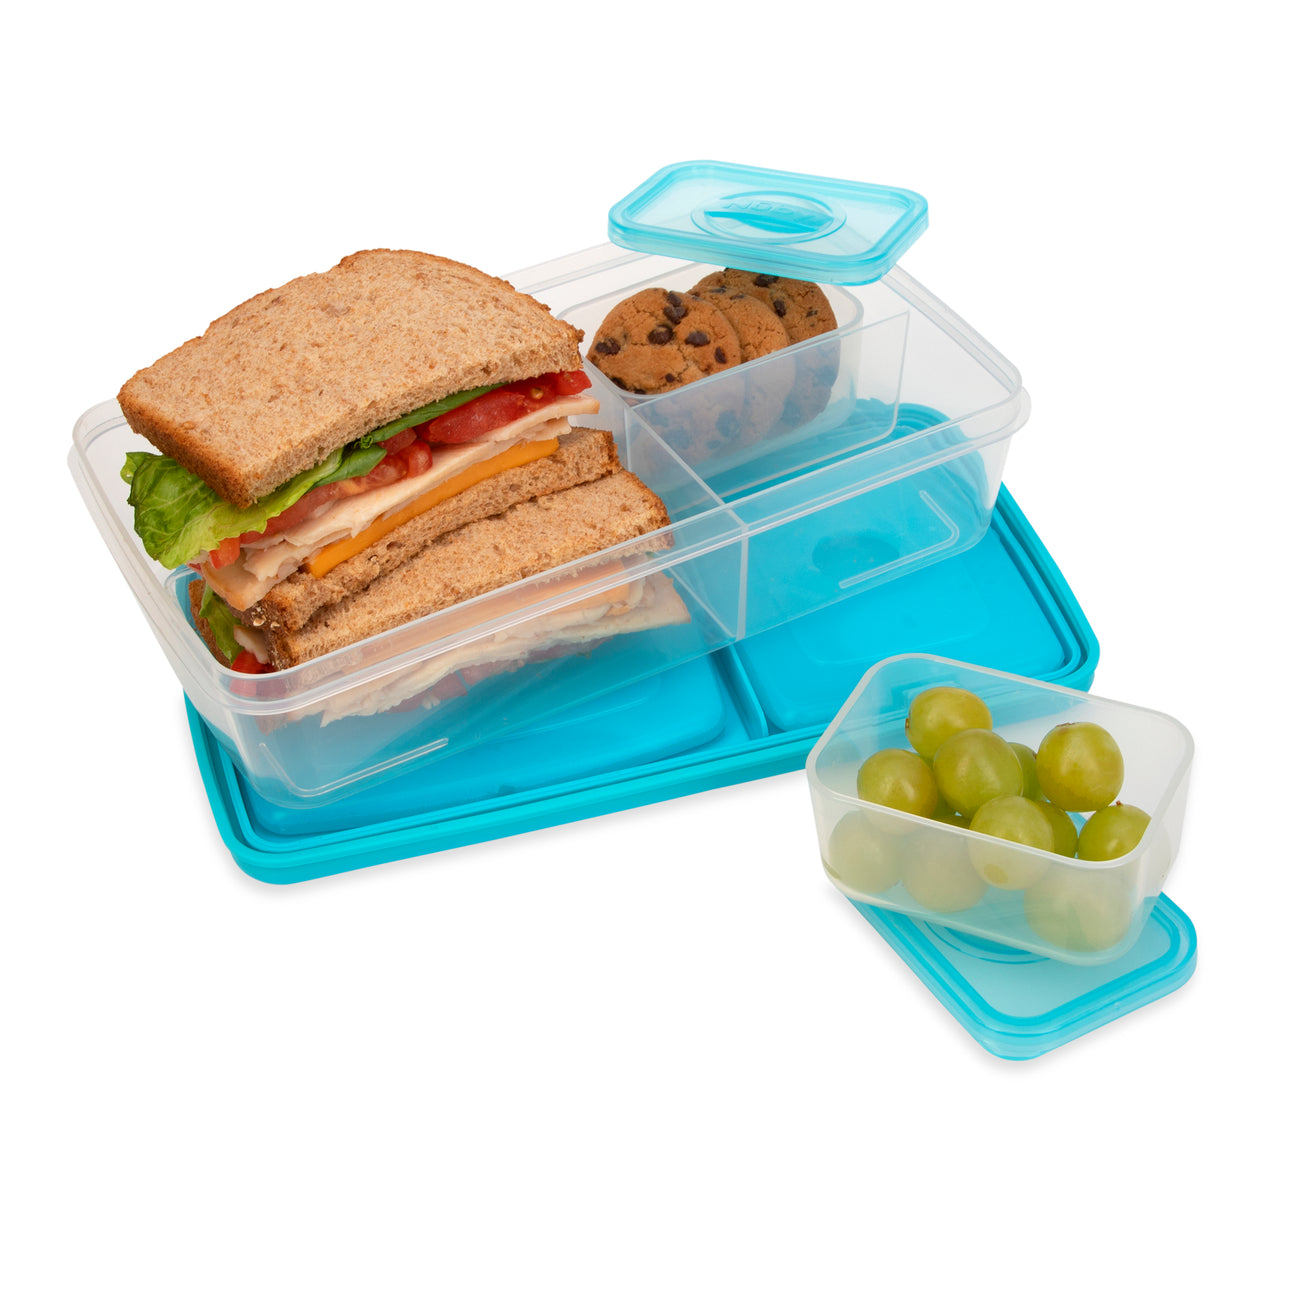 Insulated Bento Box Lunch Box - Nuby US